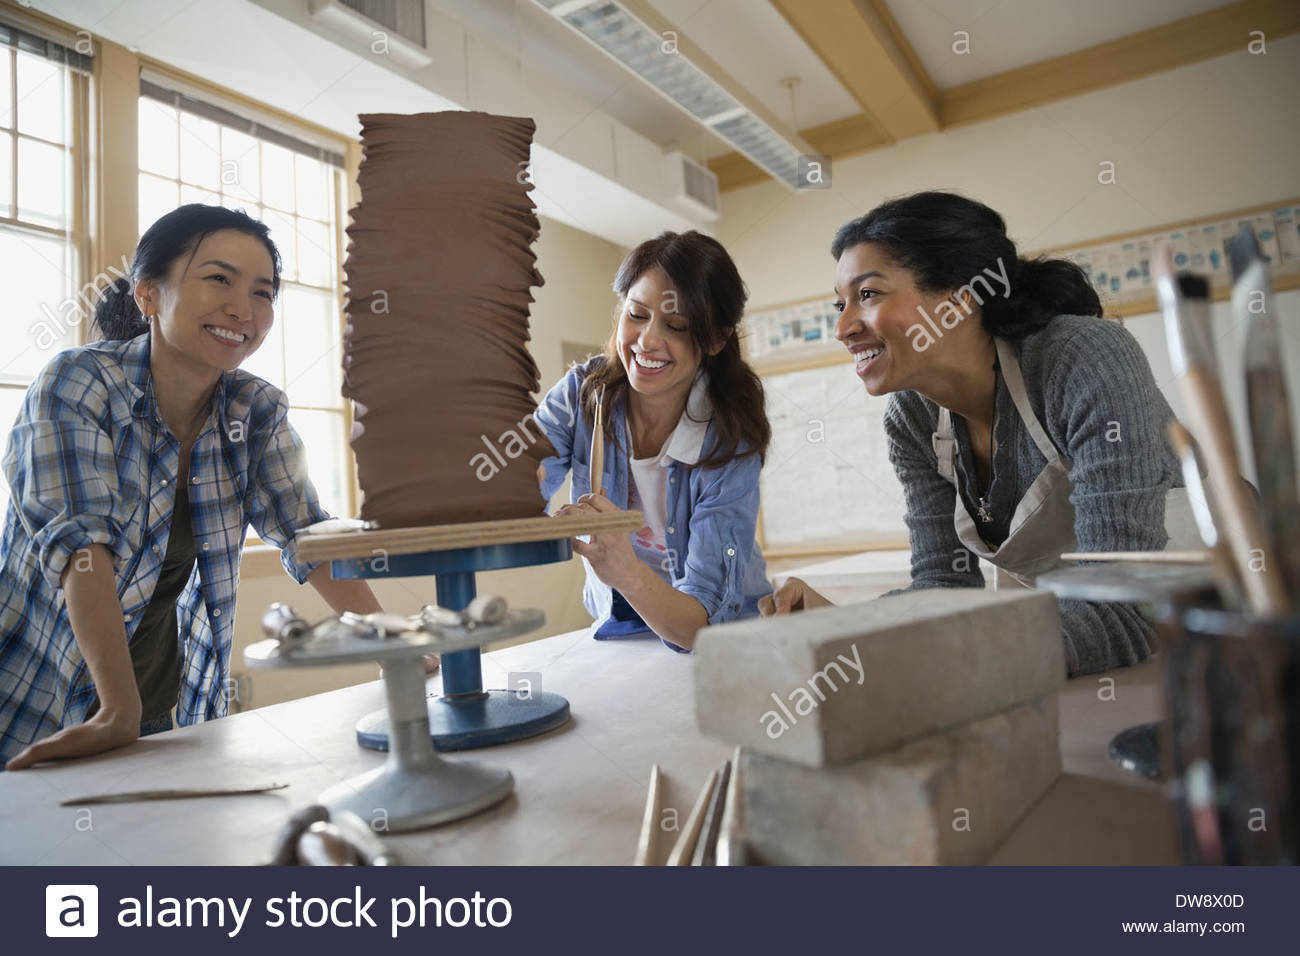 Female students working on clay sculpture Stock Photo